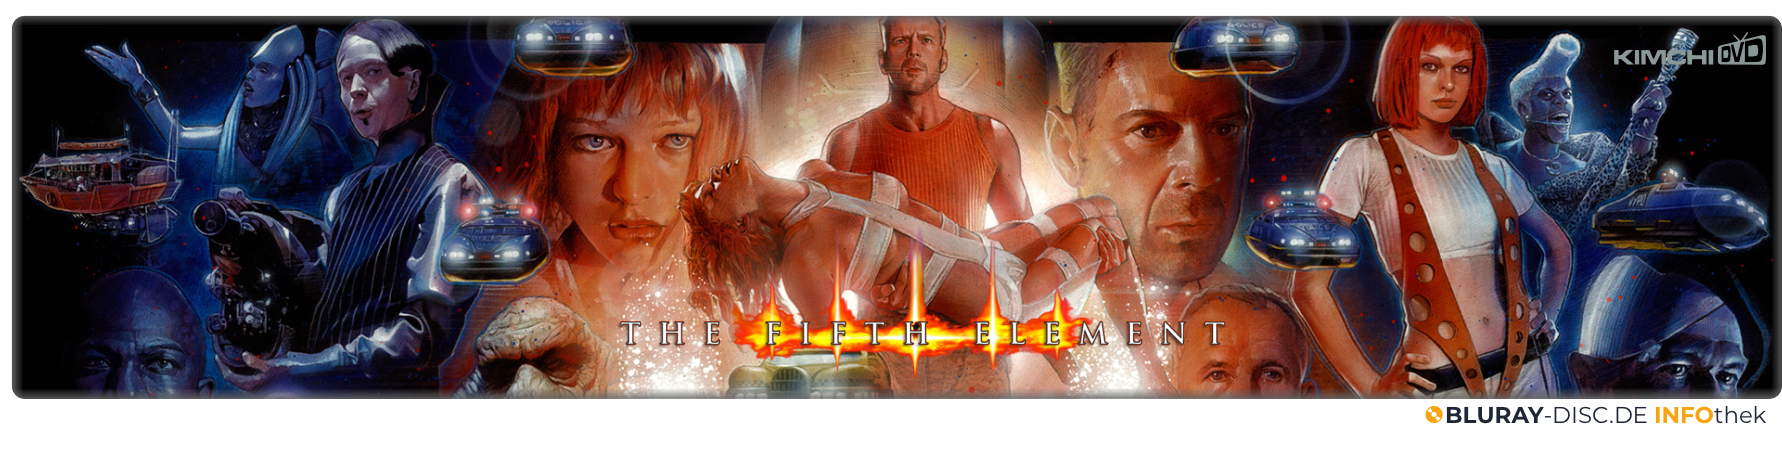 Moviebanner_KimchiDVD_The_Fifth_Element.png